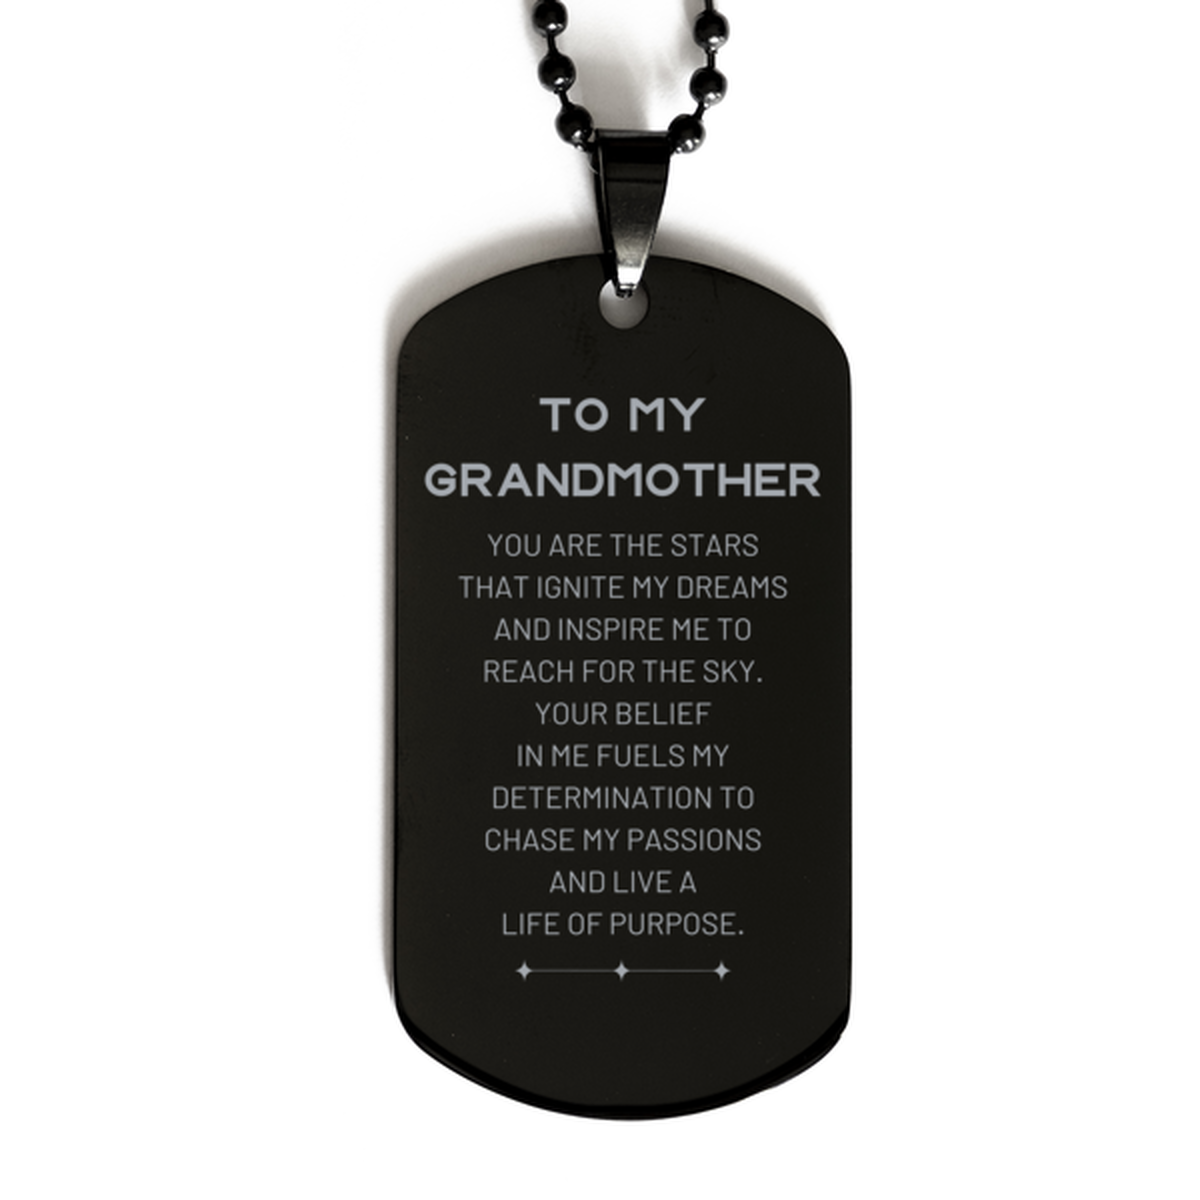 To My Grandmother Black Dog Tag, You are the stars that ignite my dreams and inspire me to reach for the sky, Birthday Unique Gifts For Grandmother, Thank You Gifts For Grandmother